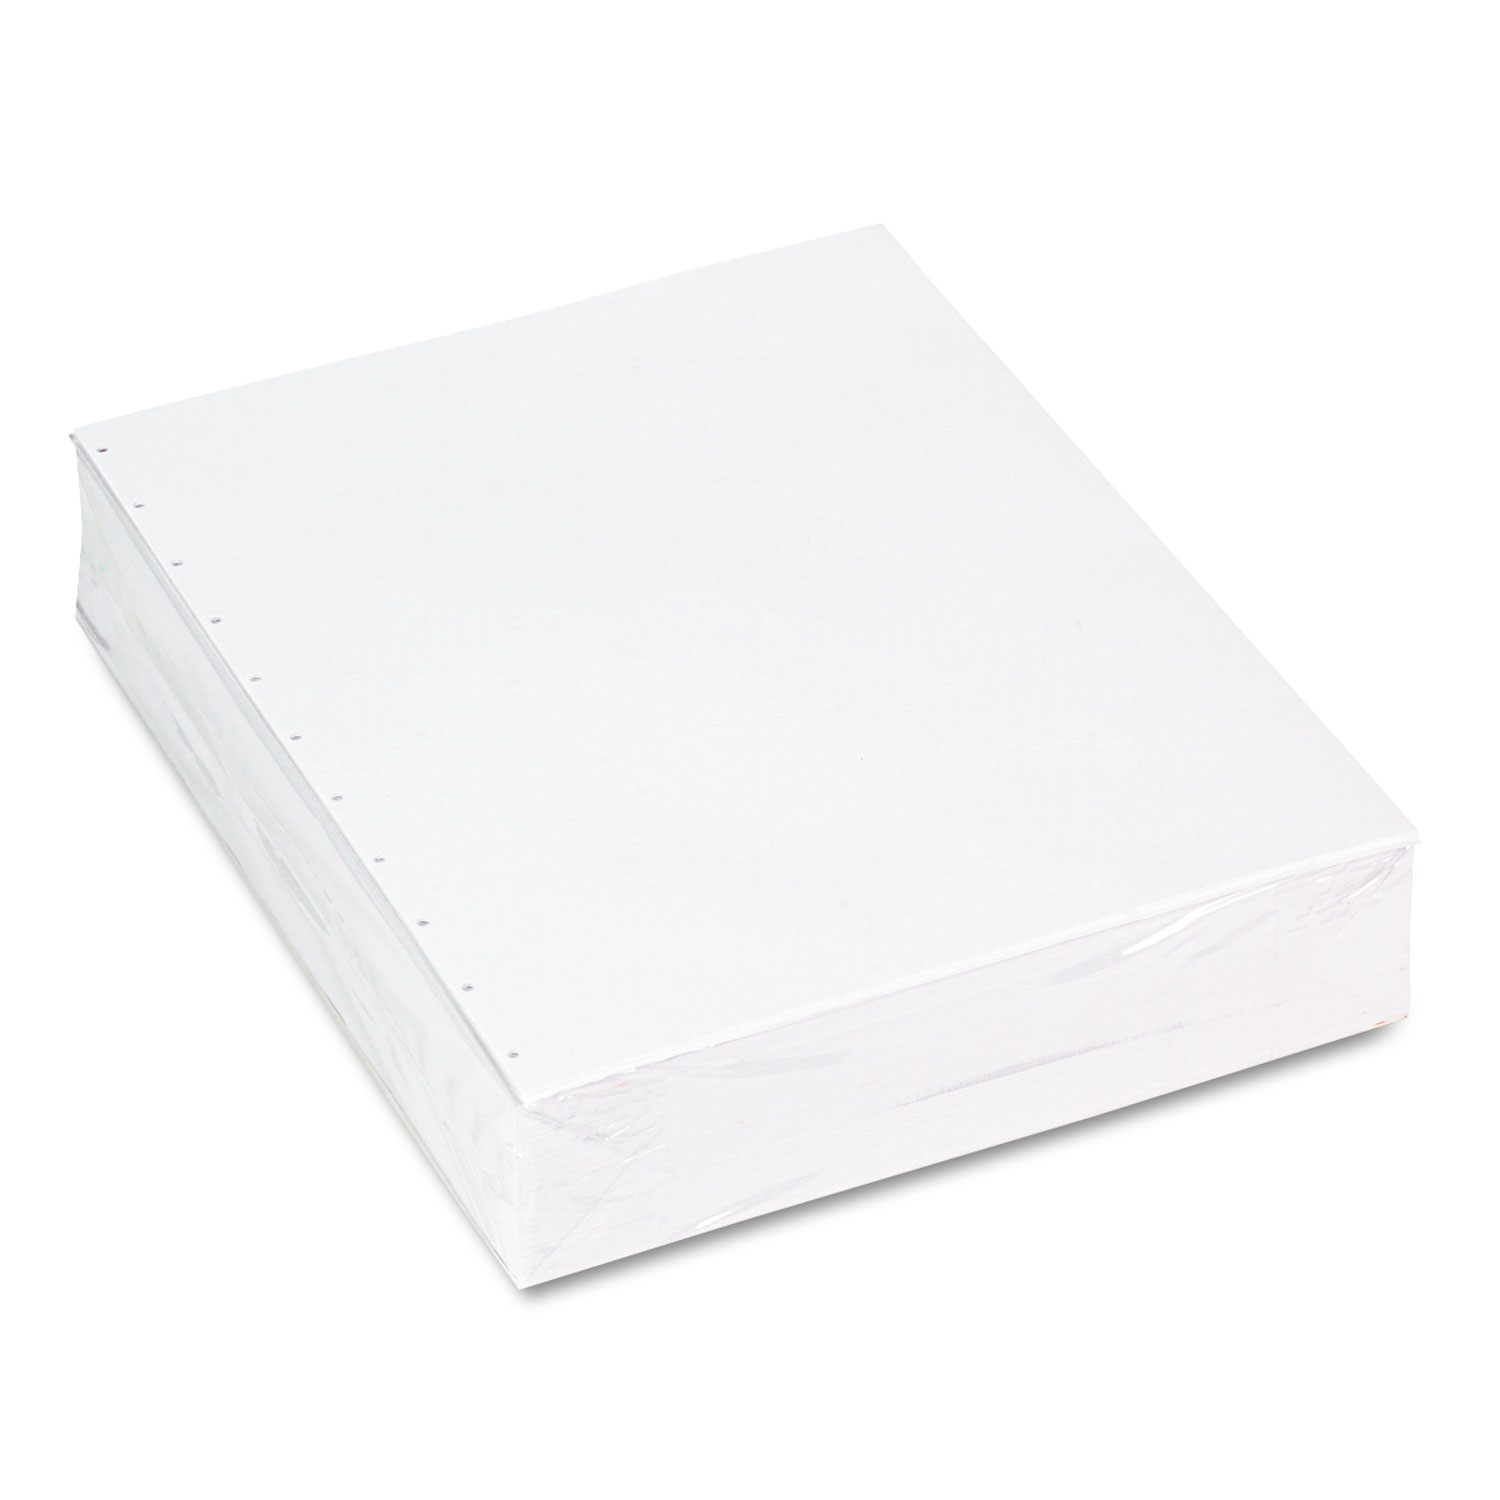 Pro Office Paper, VeloBind 11-Hole Left Punched, White, Letter, 20lb, 500/RM